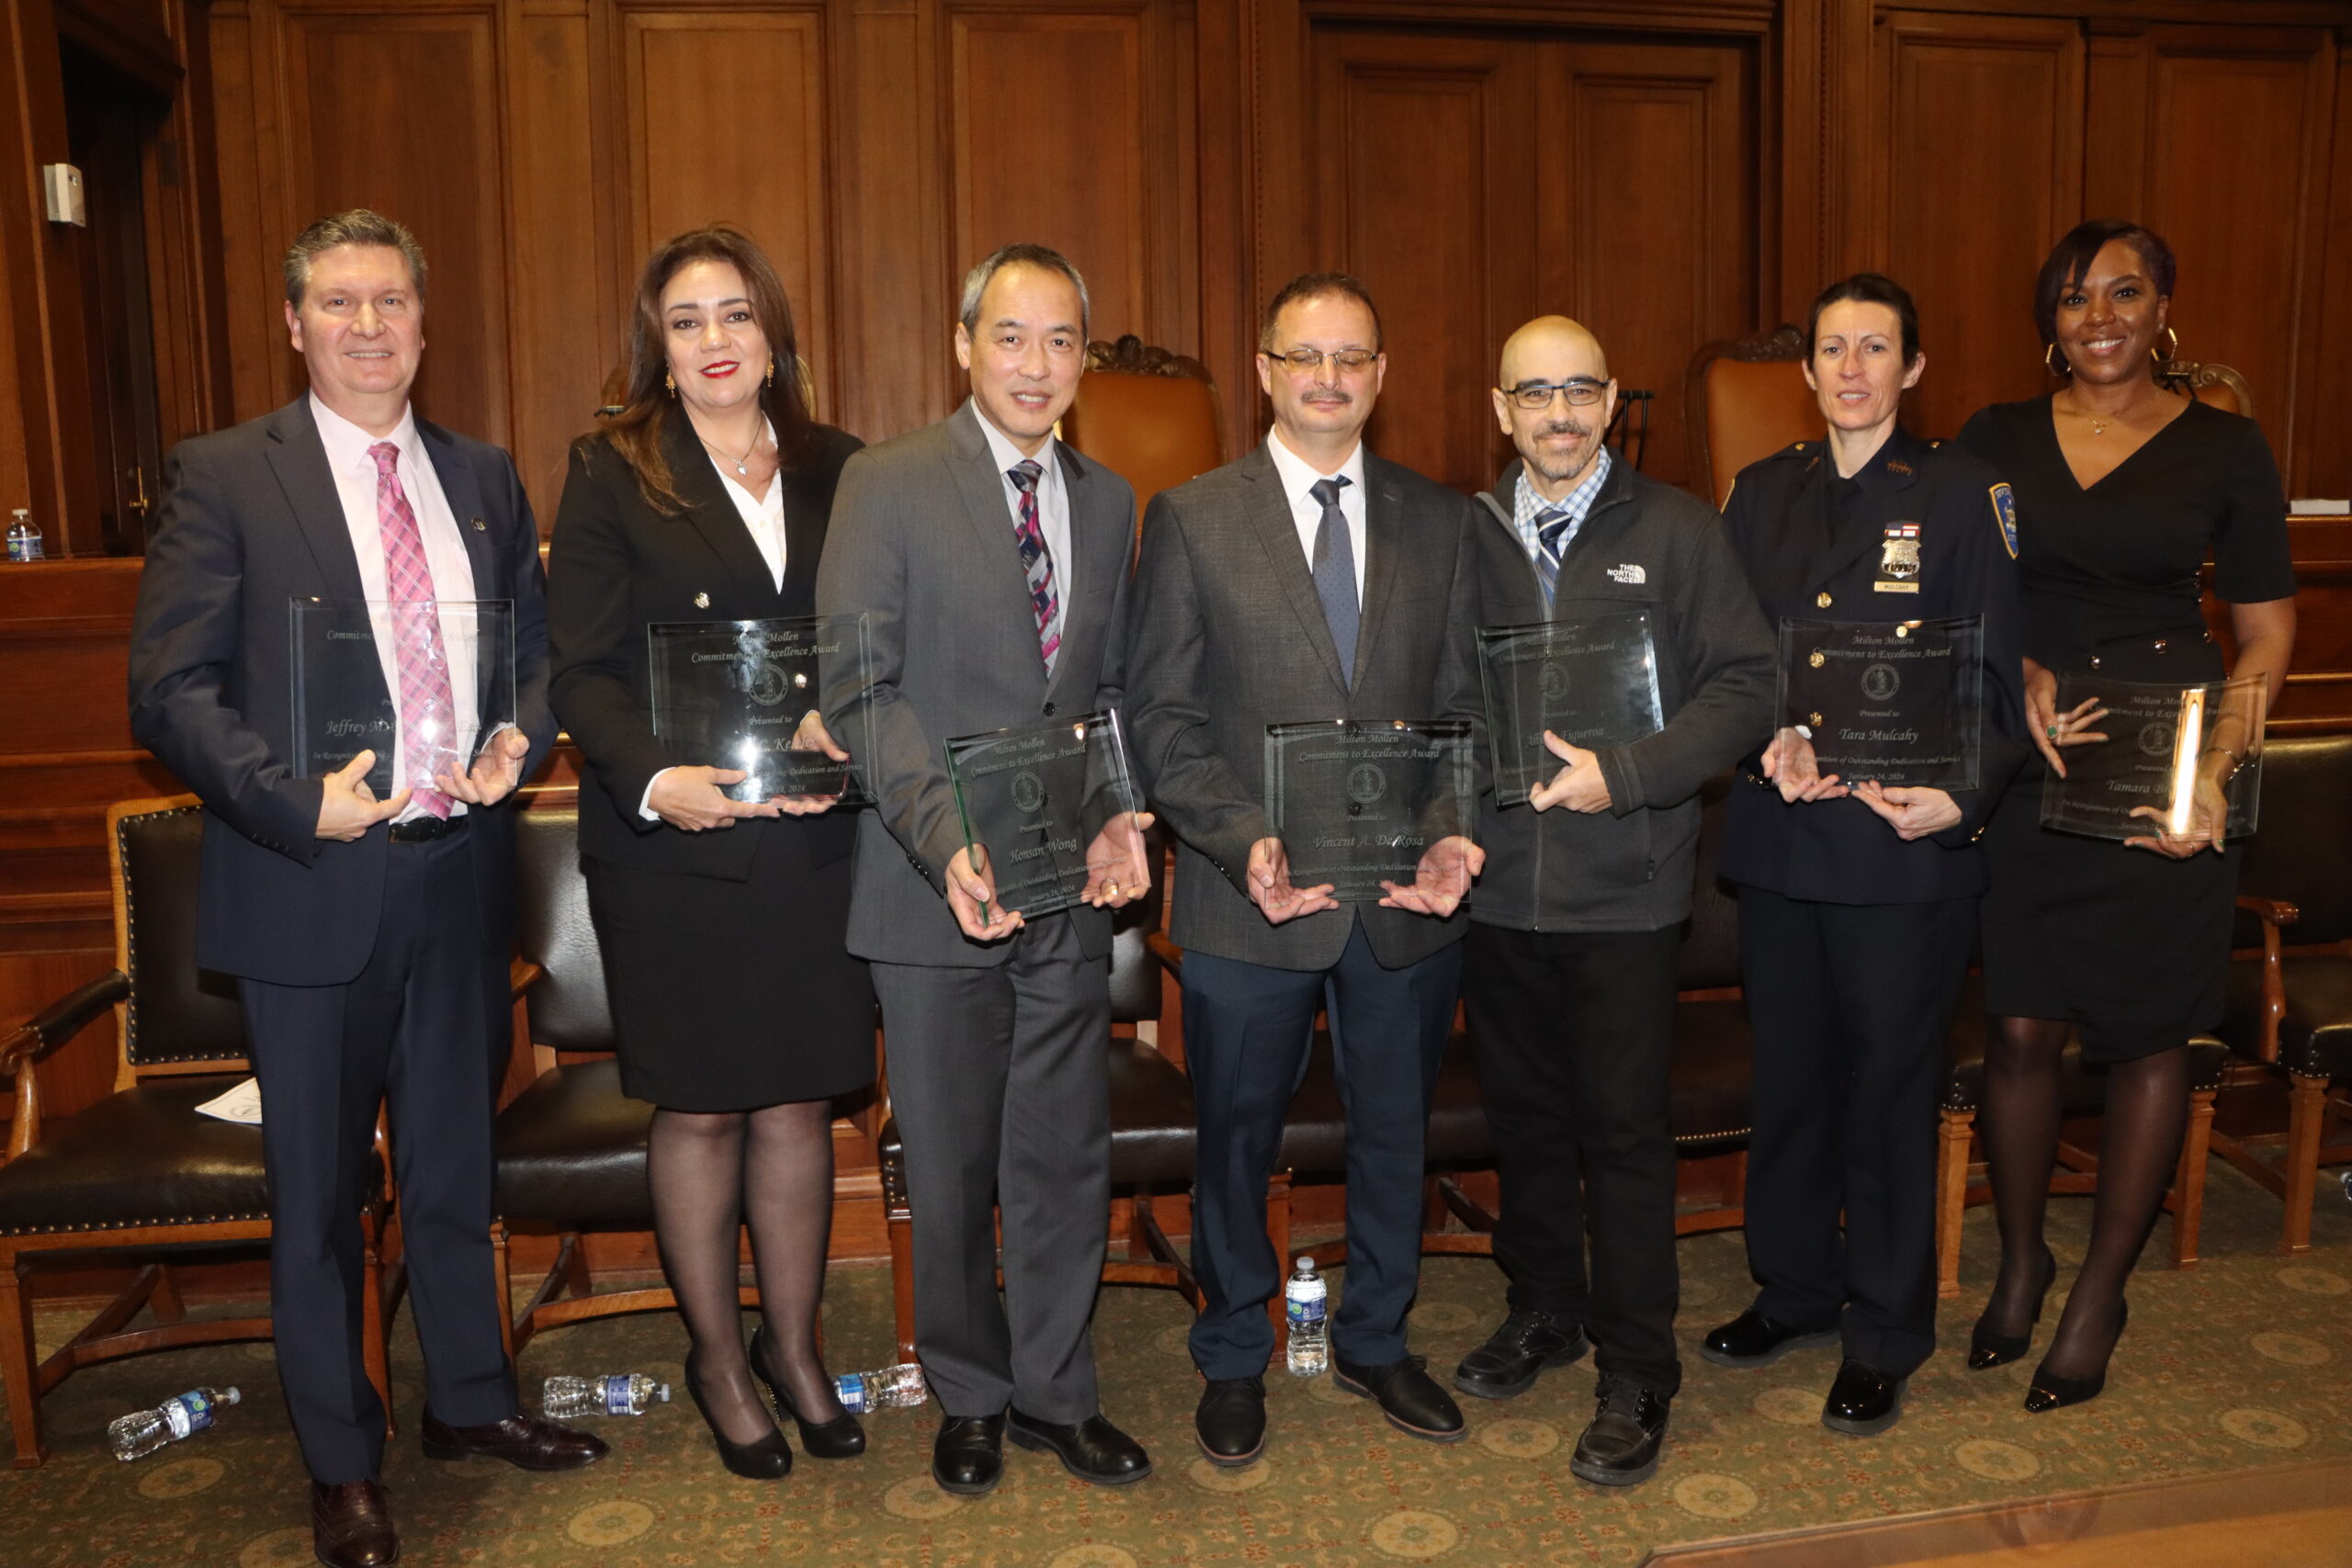 The 2024 Mollen Award honorees (pictured from left to right): Jeffrey Carpenter, Ana Kesler, Honsan Wong, Vincent DeRosa, Alberto Figueroa, C.O. Tara Mulcahy, and Tamara Broadus. Not pictured is Phyllis Carusillo, court analyst from the Appellate Division, Ancillary Agency of the Grievance Committee for the Tenth Judicial District at Milton Mollen Commitment.